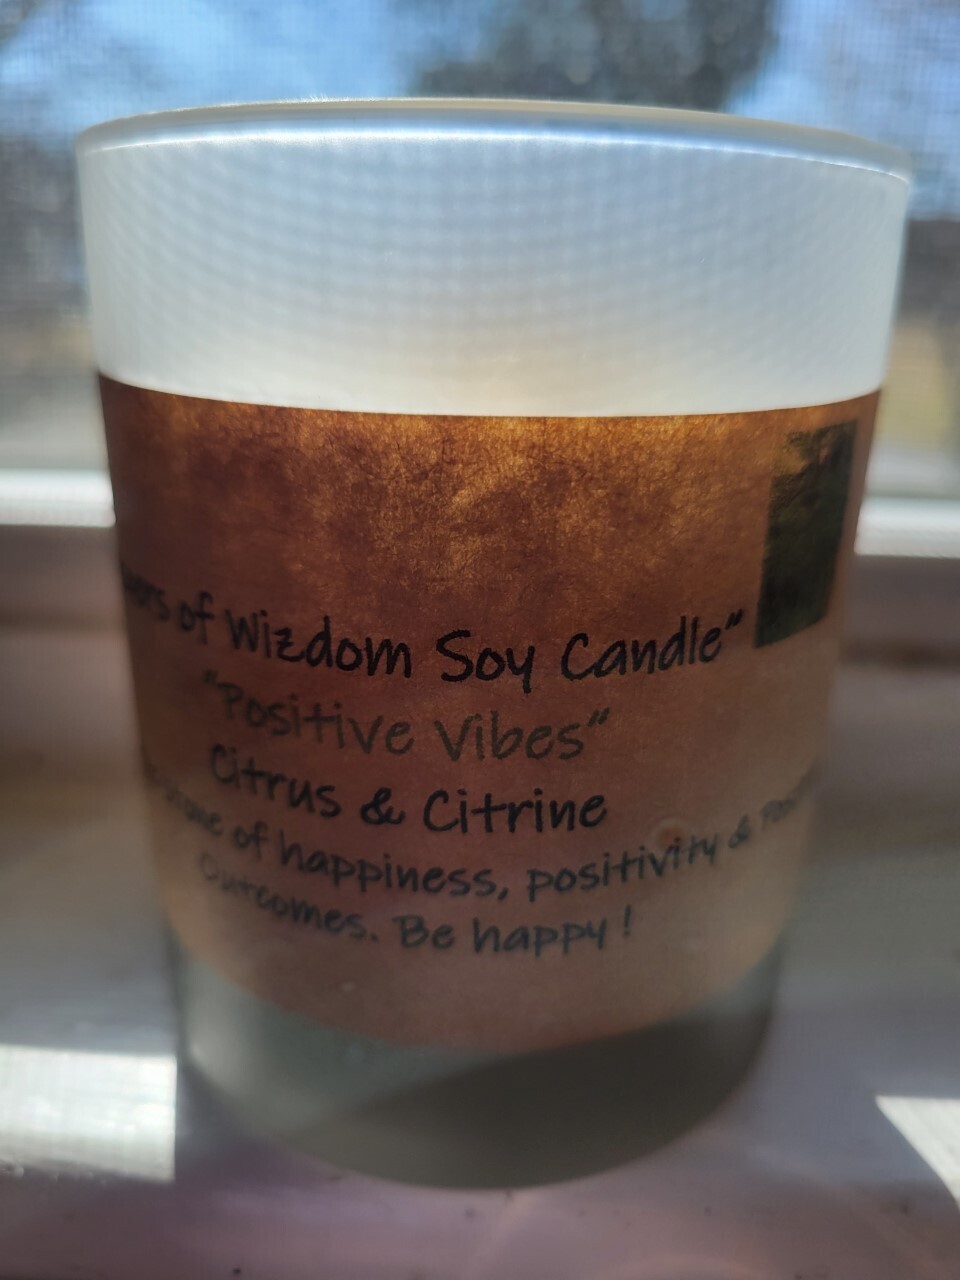 Judy's Soy Candle -Positive Vibes -Citrus & Citrine